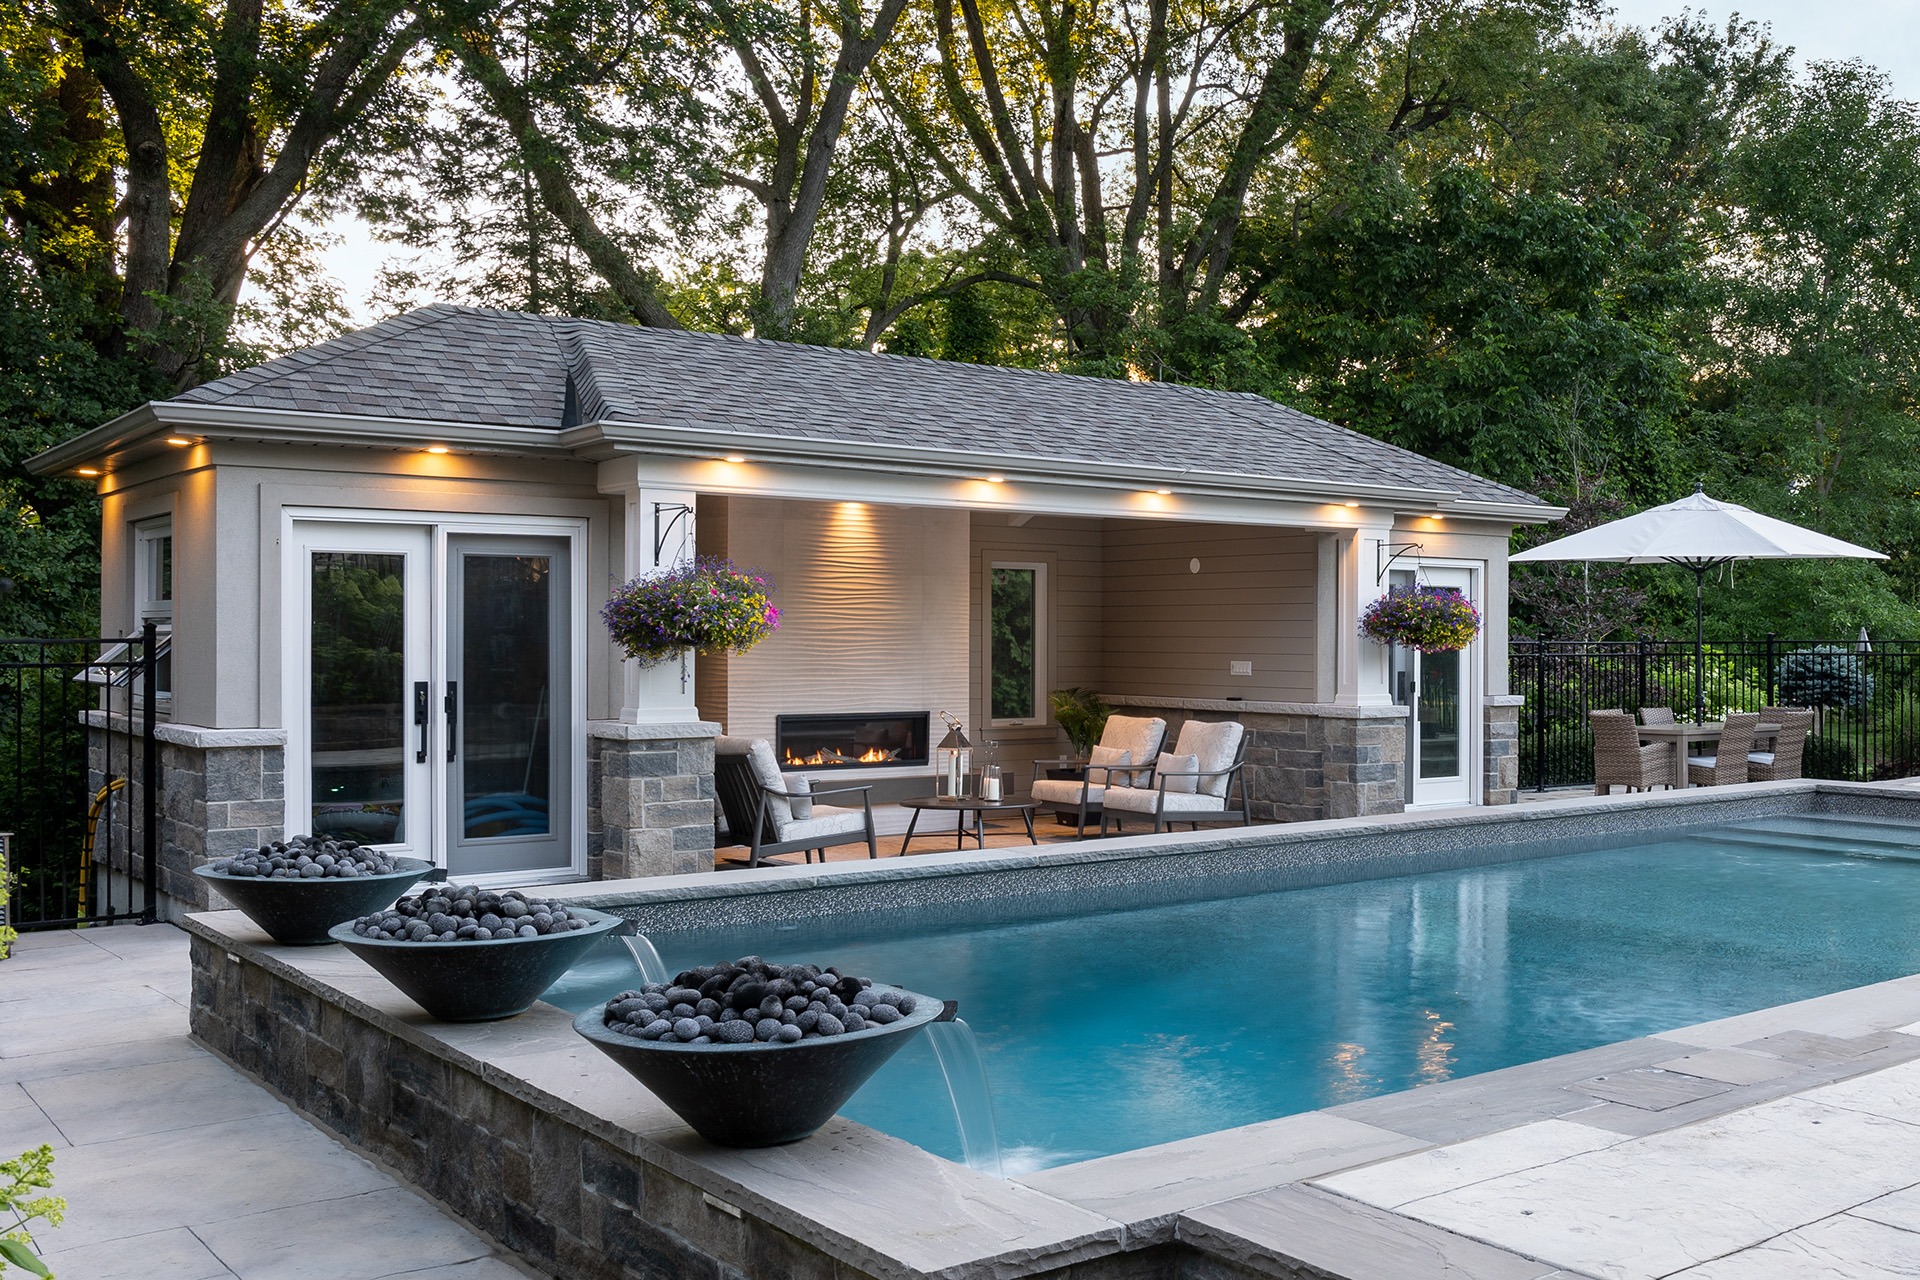 An elegant poolside setting with a cozy pavilion, outdoor furniture, a fireplace, and water features, surrounded by trees at dusk.